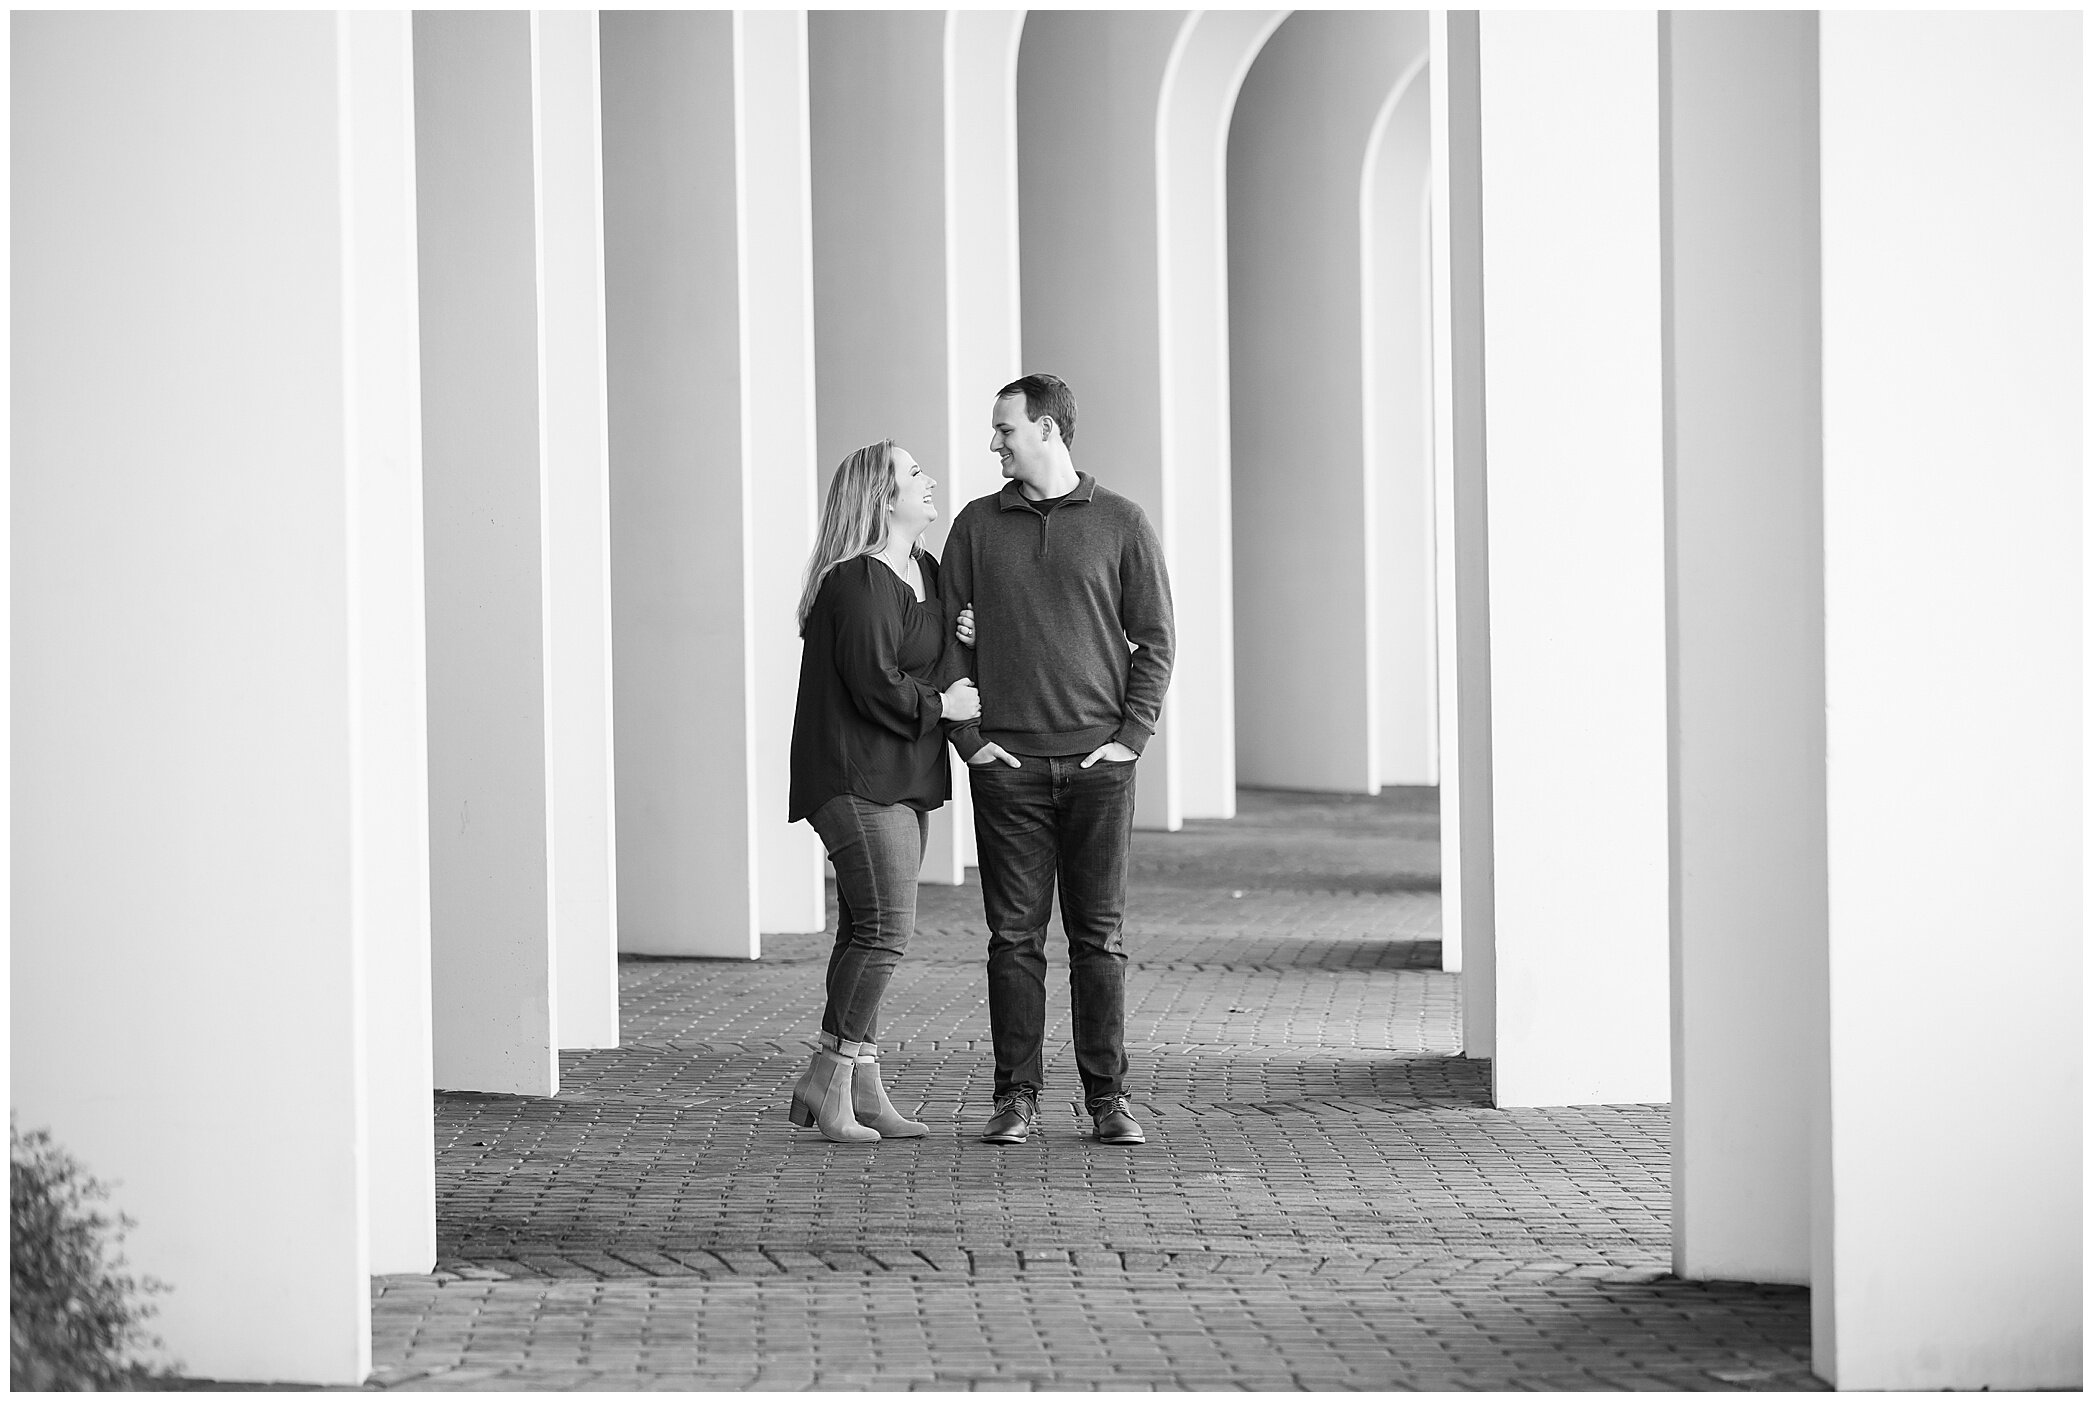 engaged couple poses together during winter Christopher Newport University engagement session